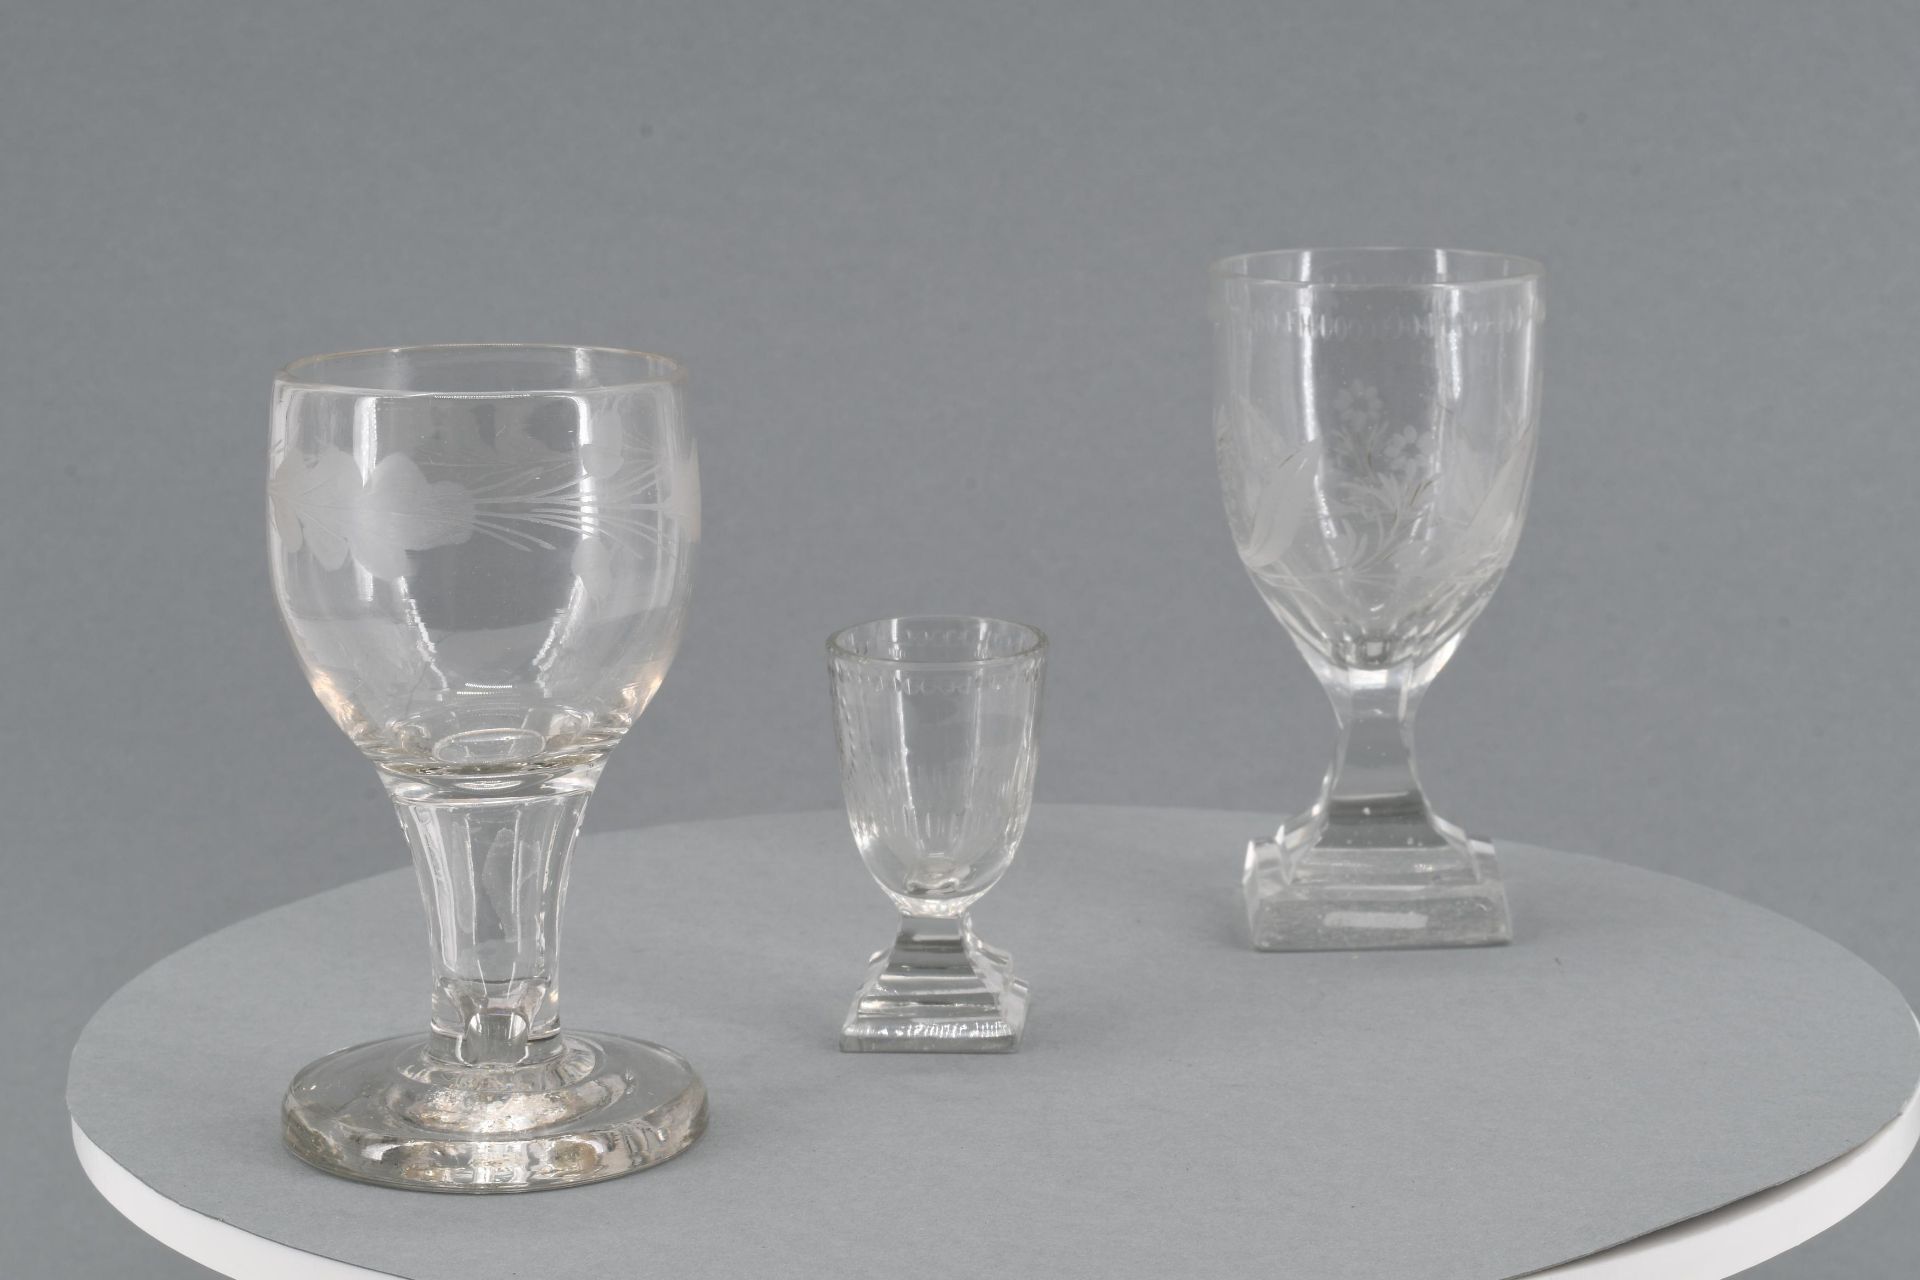 Goblet with monogram and schnapps glass with blue rim - Image 13 of 15